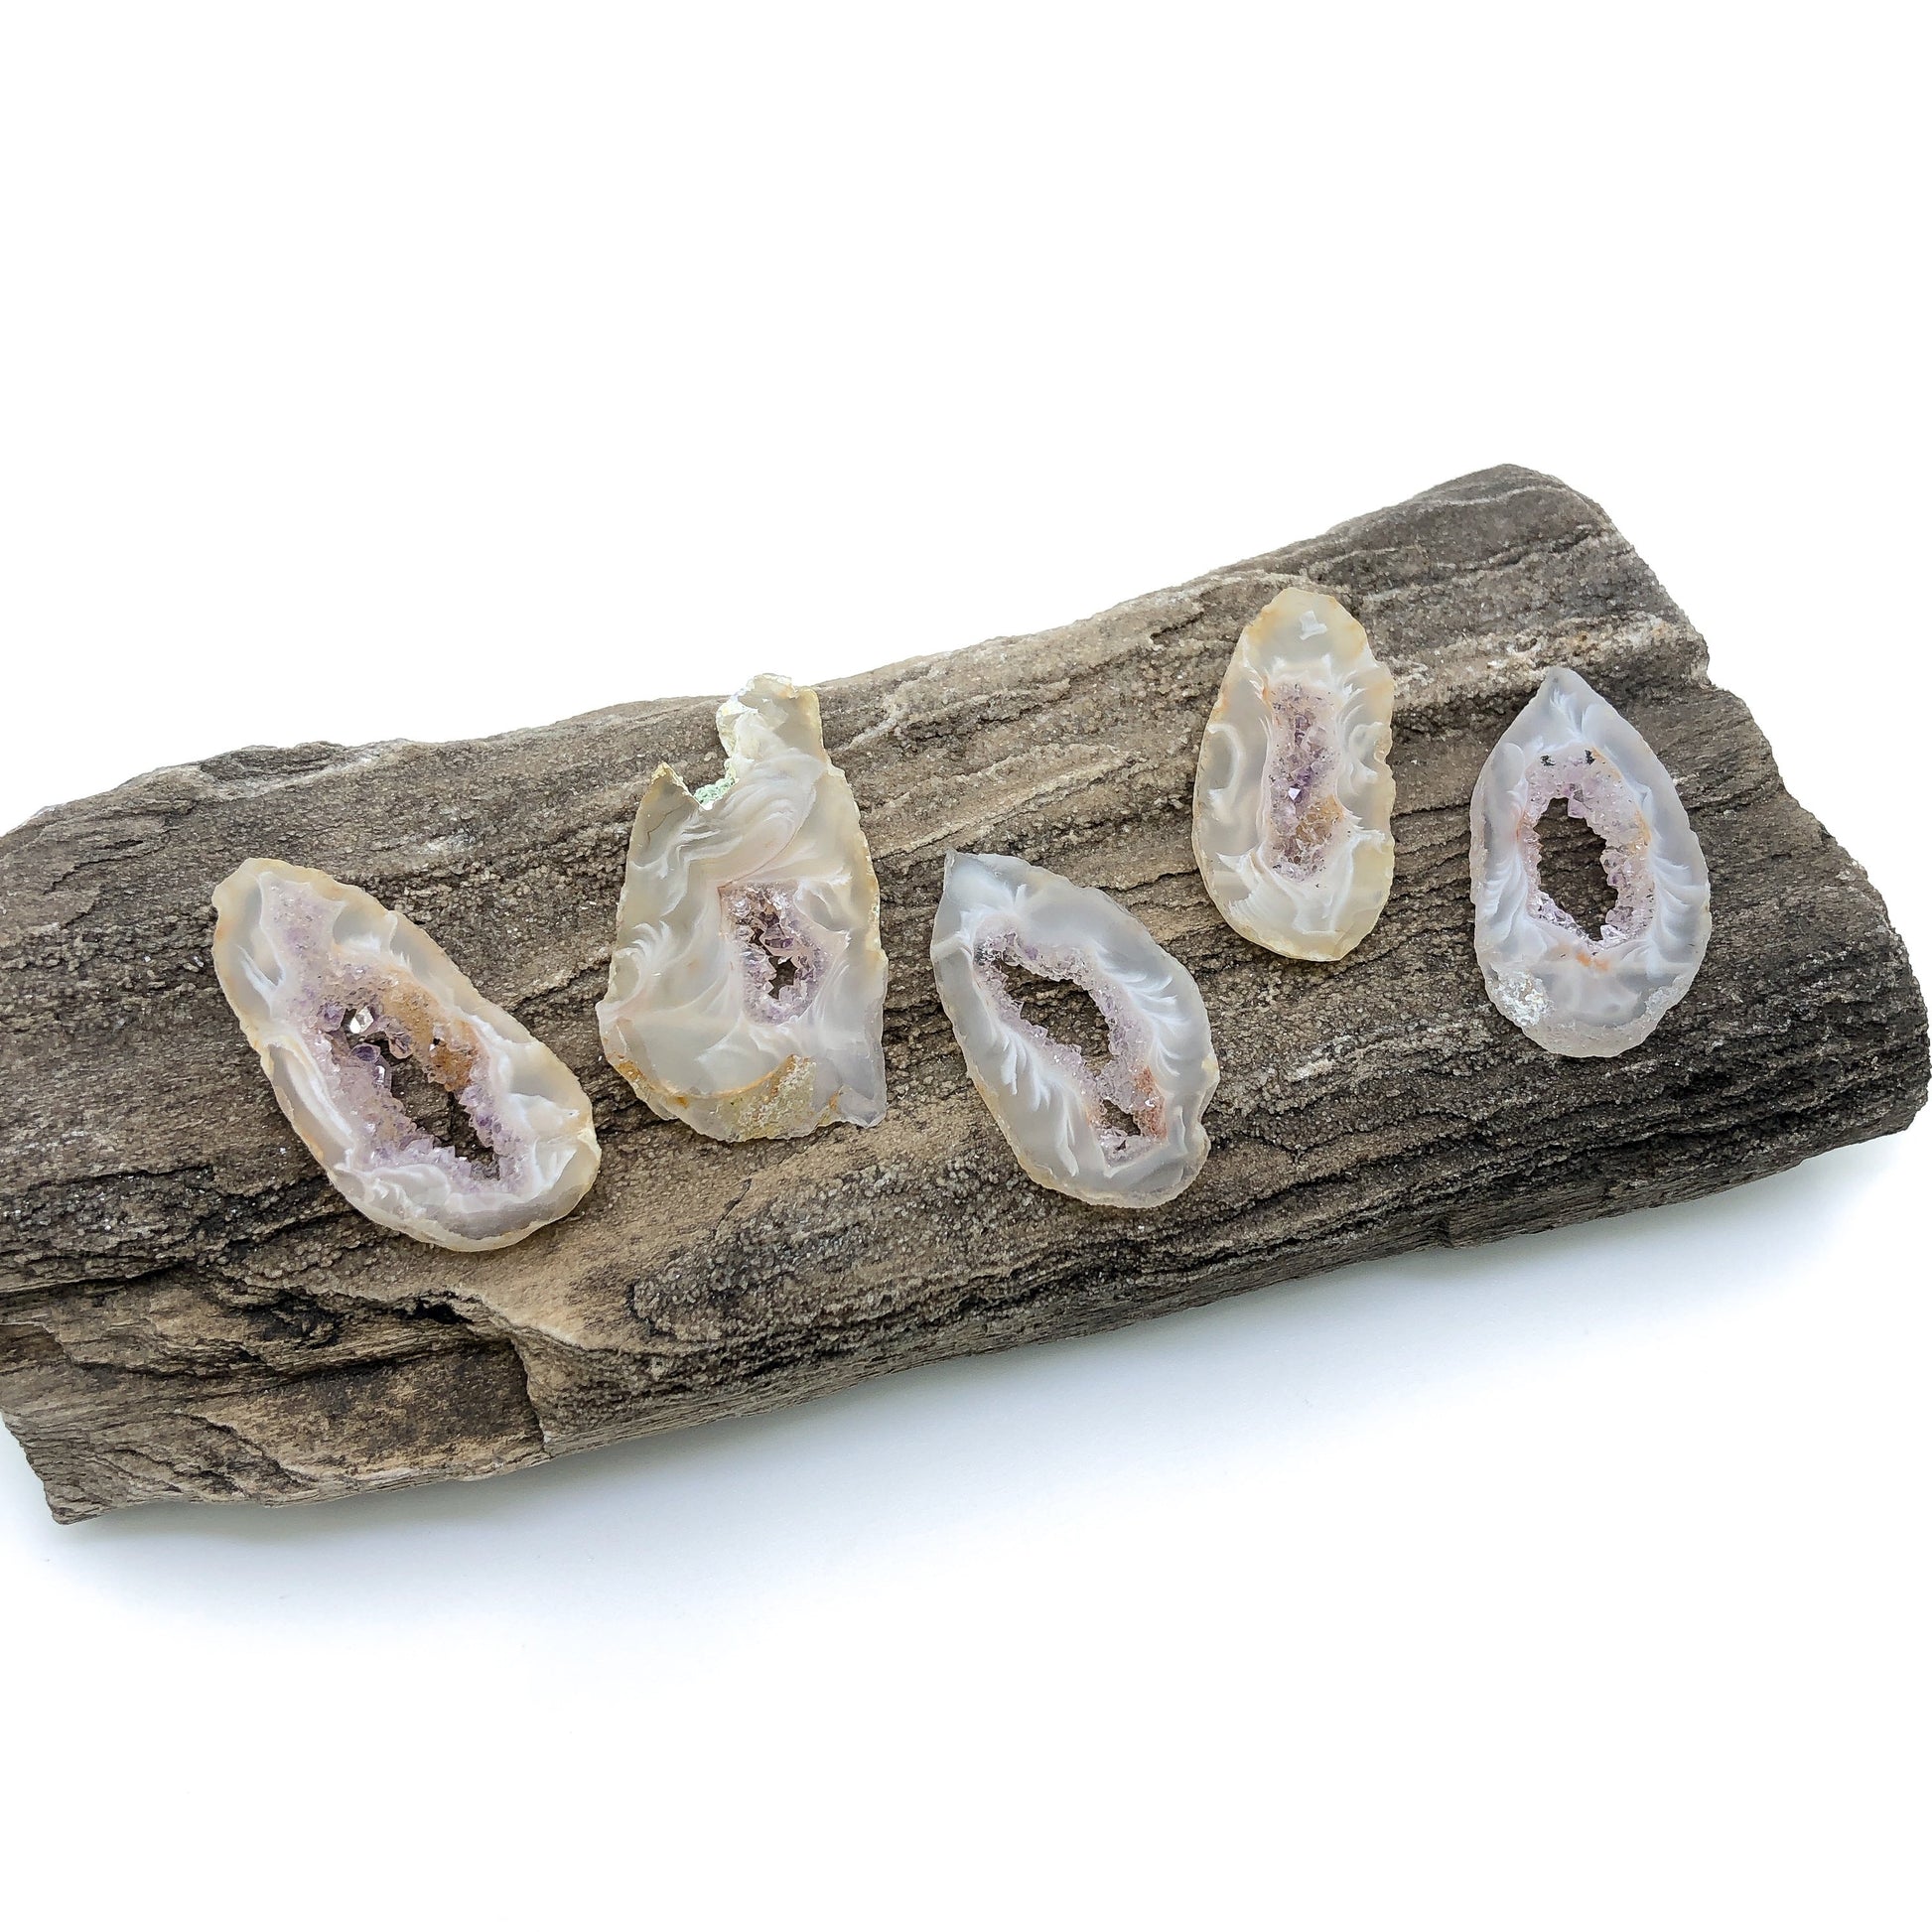 Geode Slice with Drusy Inclusion Tip-Drilled Pendant - 1 pc.